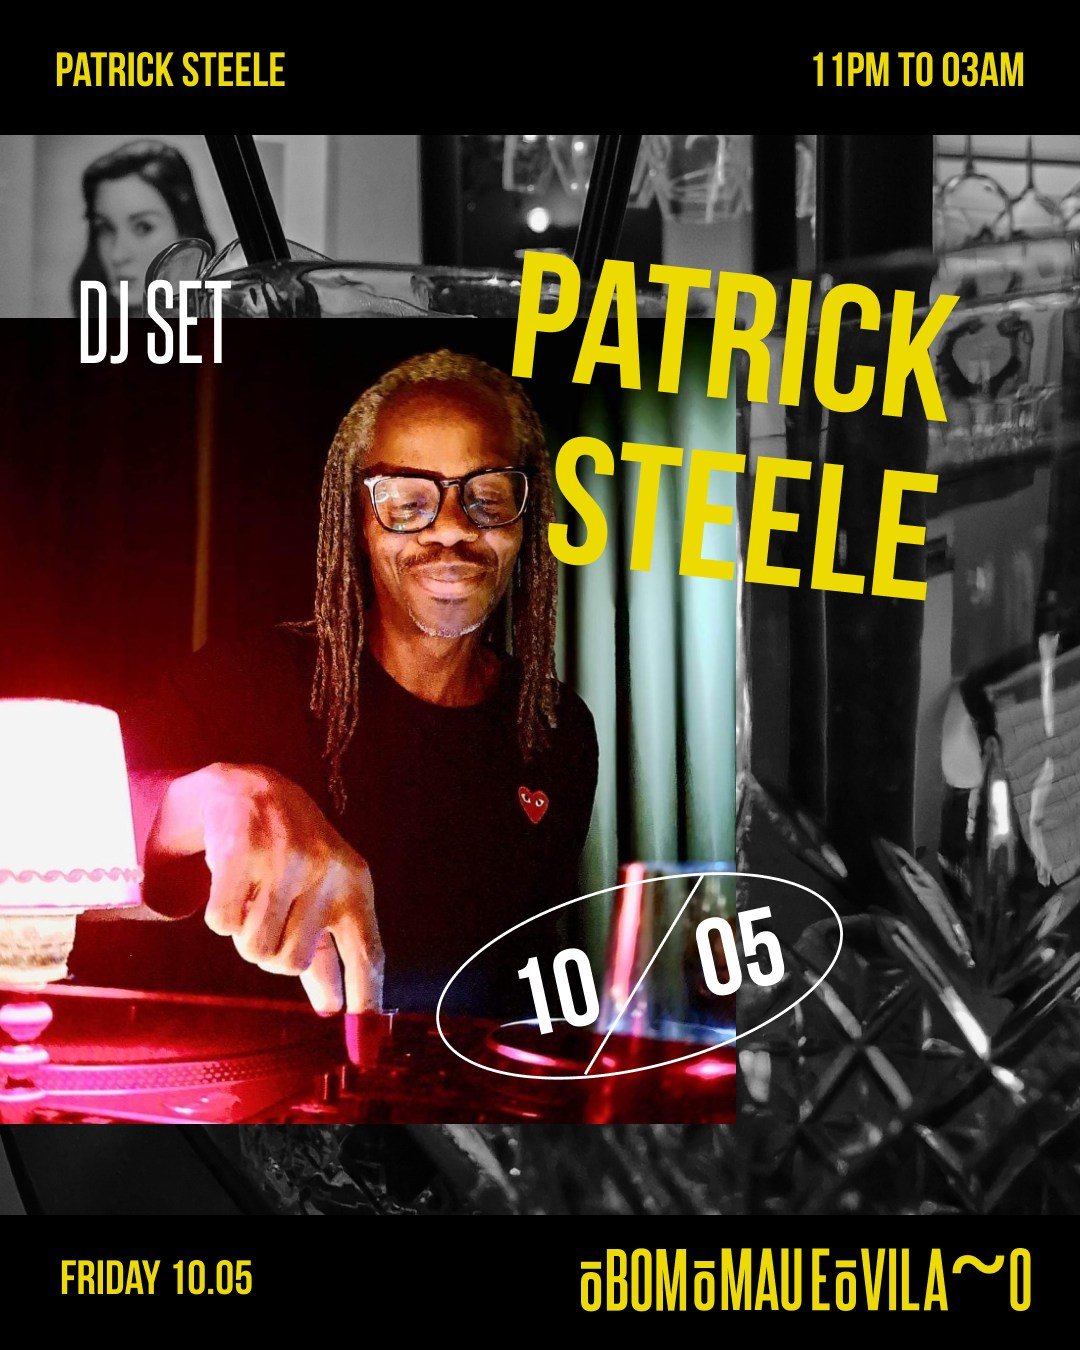 A passionate music collector, @patsteele has been a regular presence on the London music scene since the 90s, known for his diverse selection. A member of the soul collective Confunktion, he has played at parties and in warehouses in and around Londo